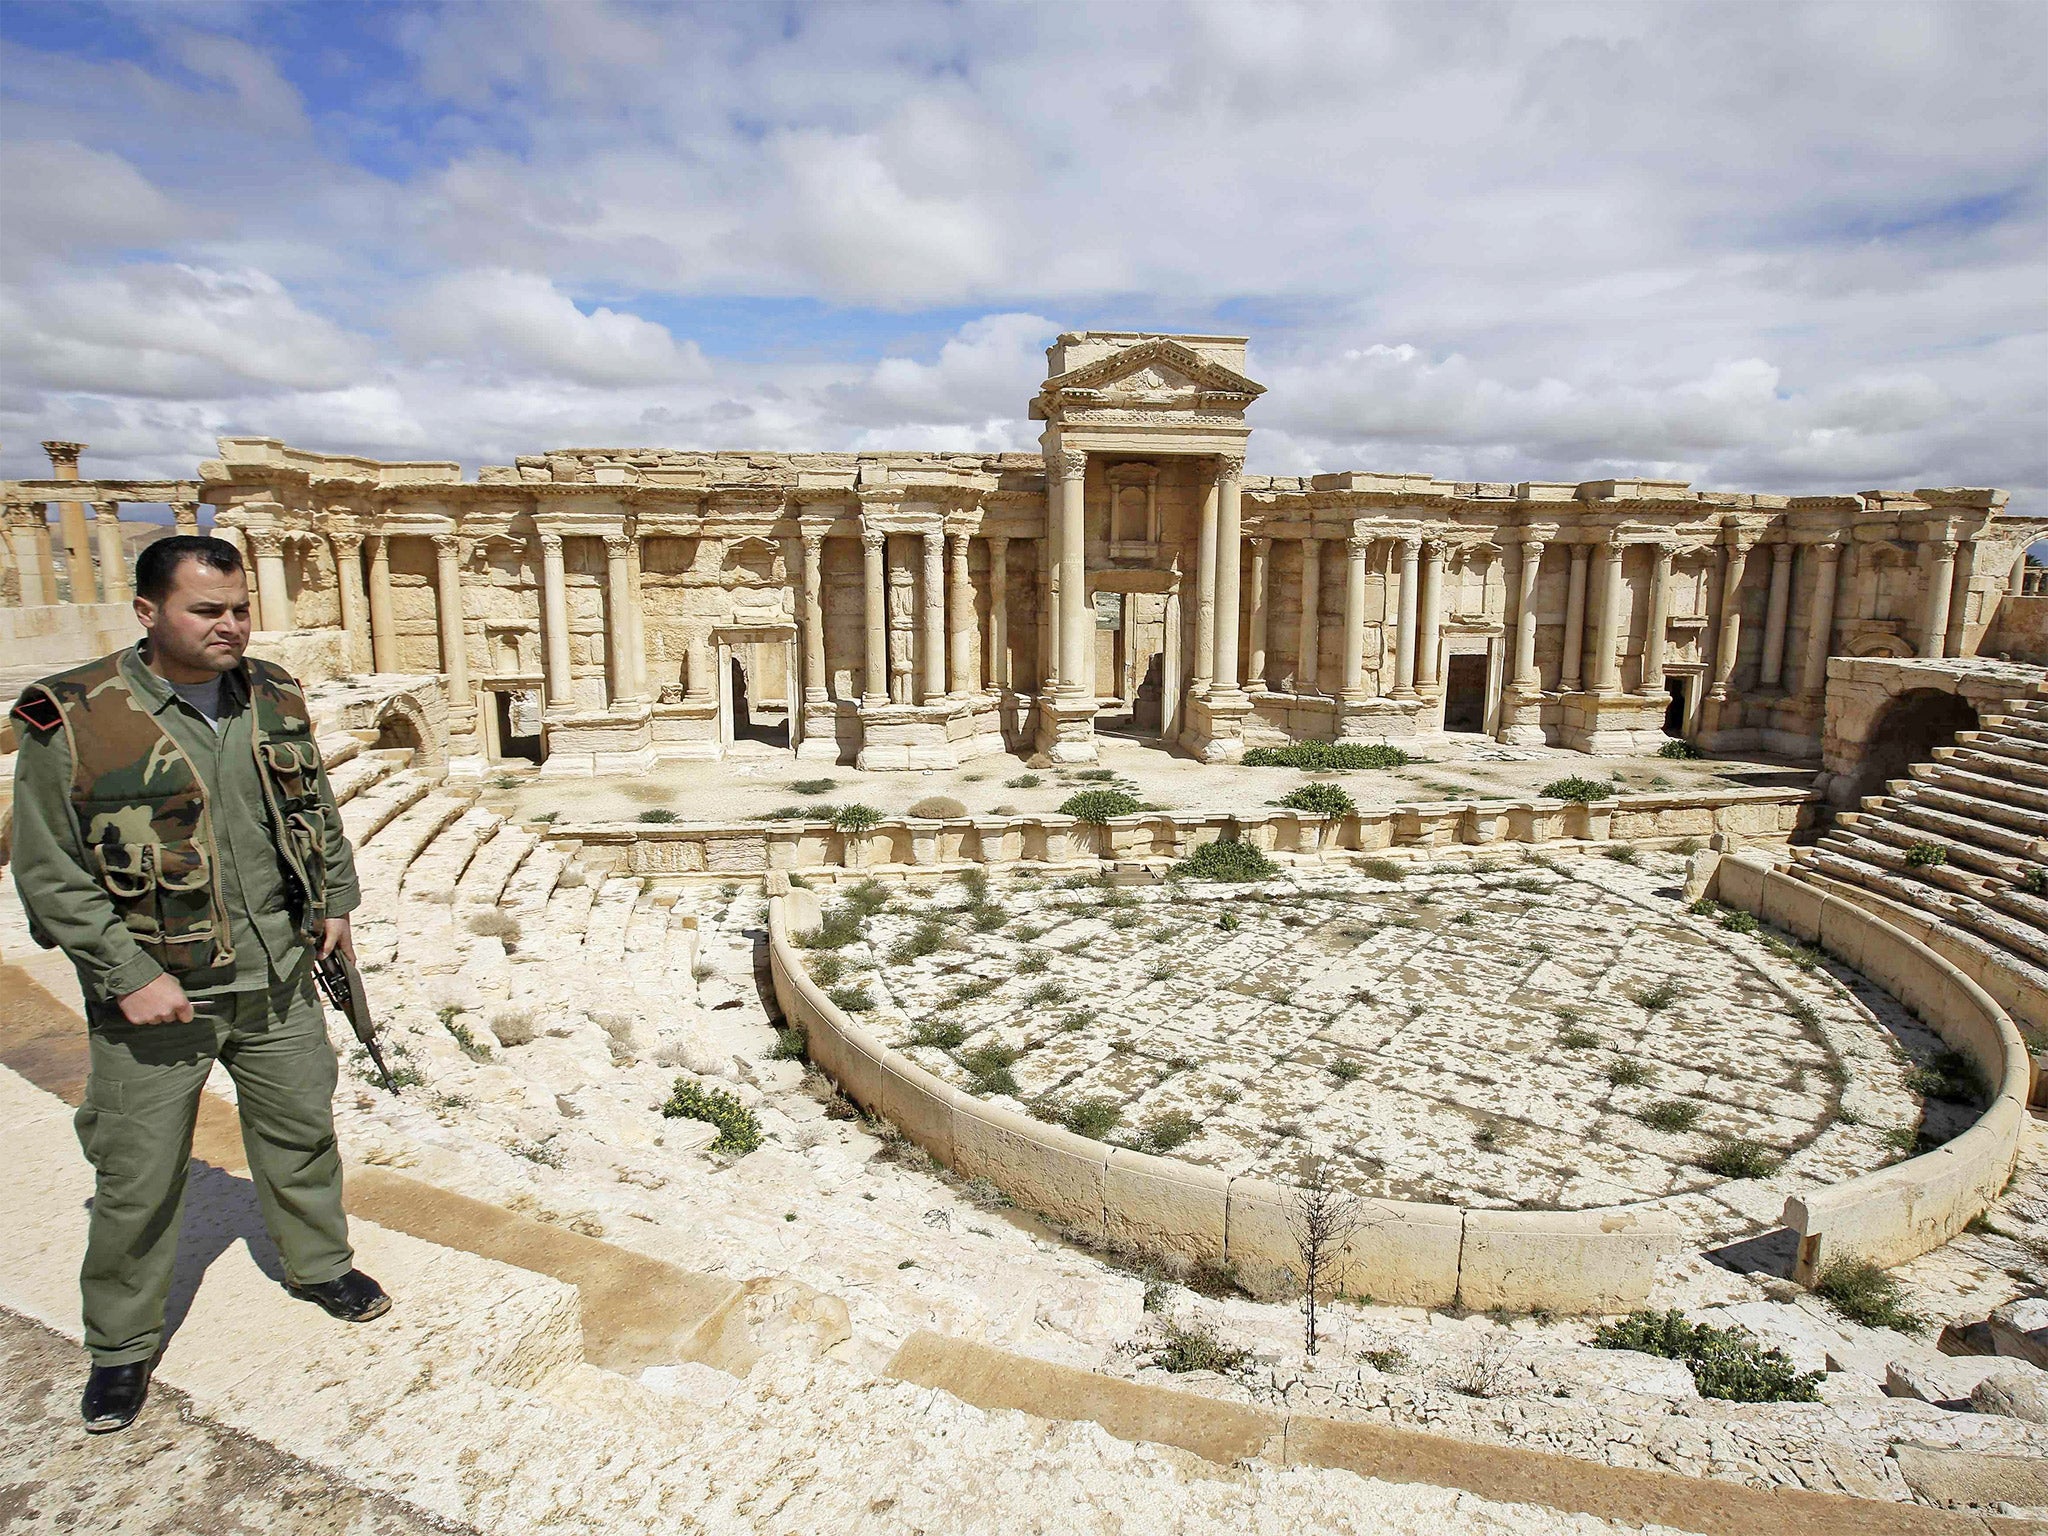 A Syrian policeman patrolling Palmyra in 2014, prior to the ancient city being seized by Isis forces last May